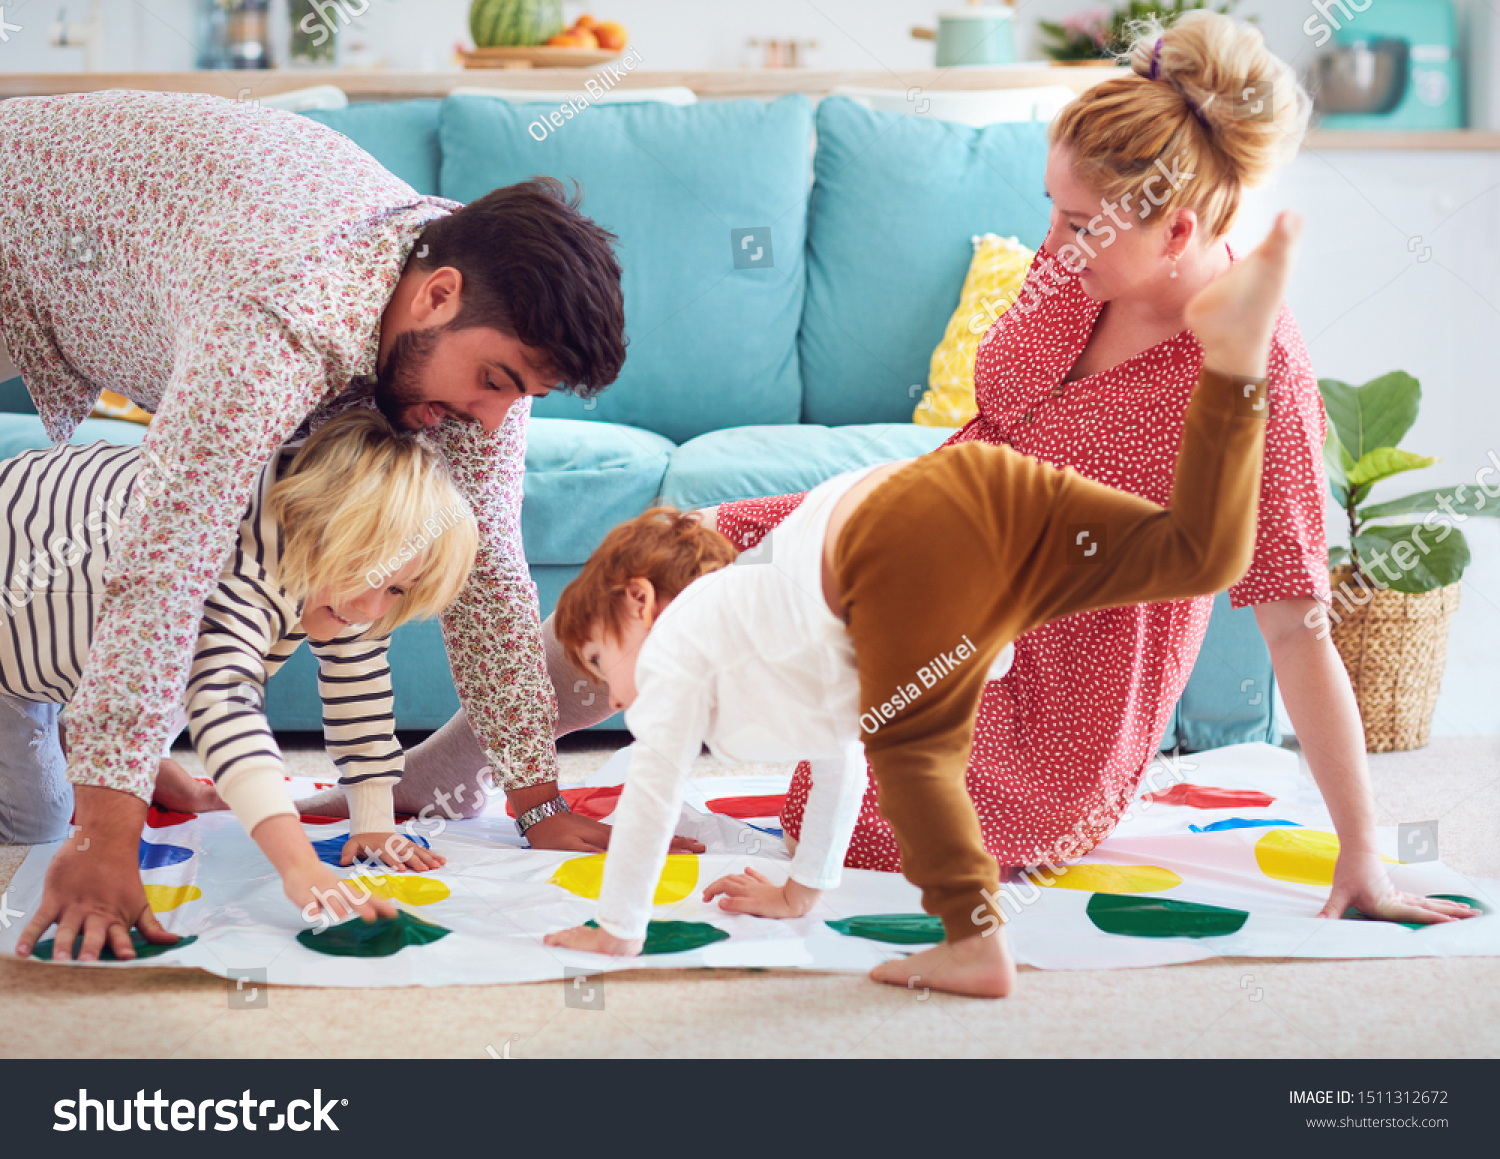 happy family having fun together, playing twister game at home #1511312672